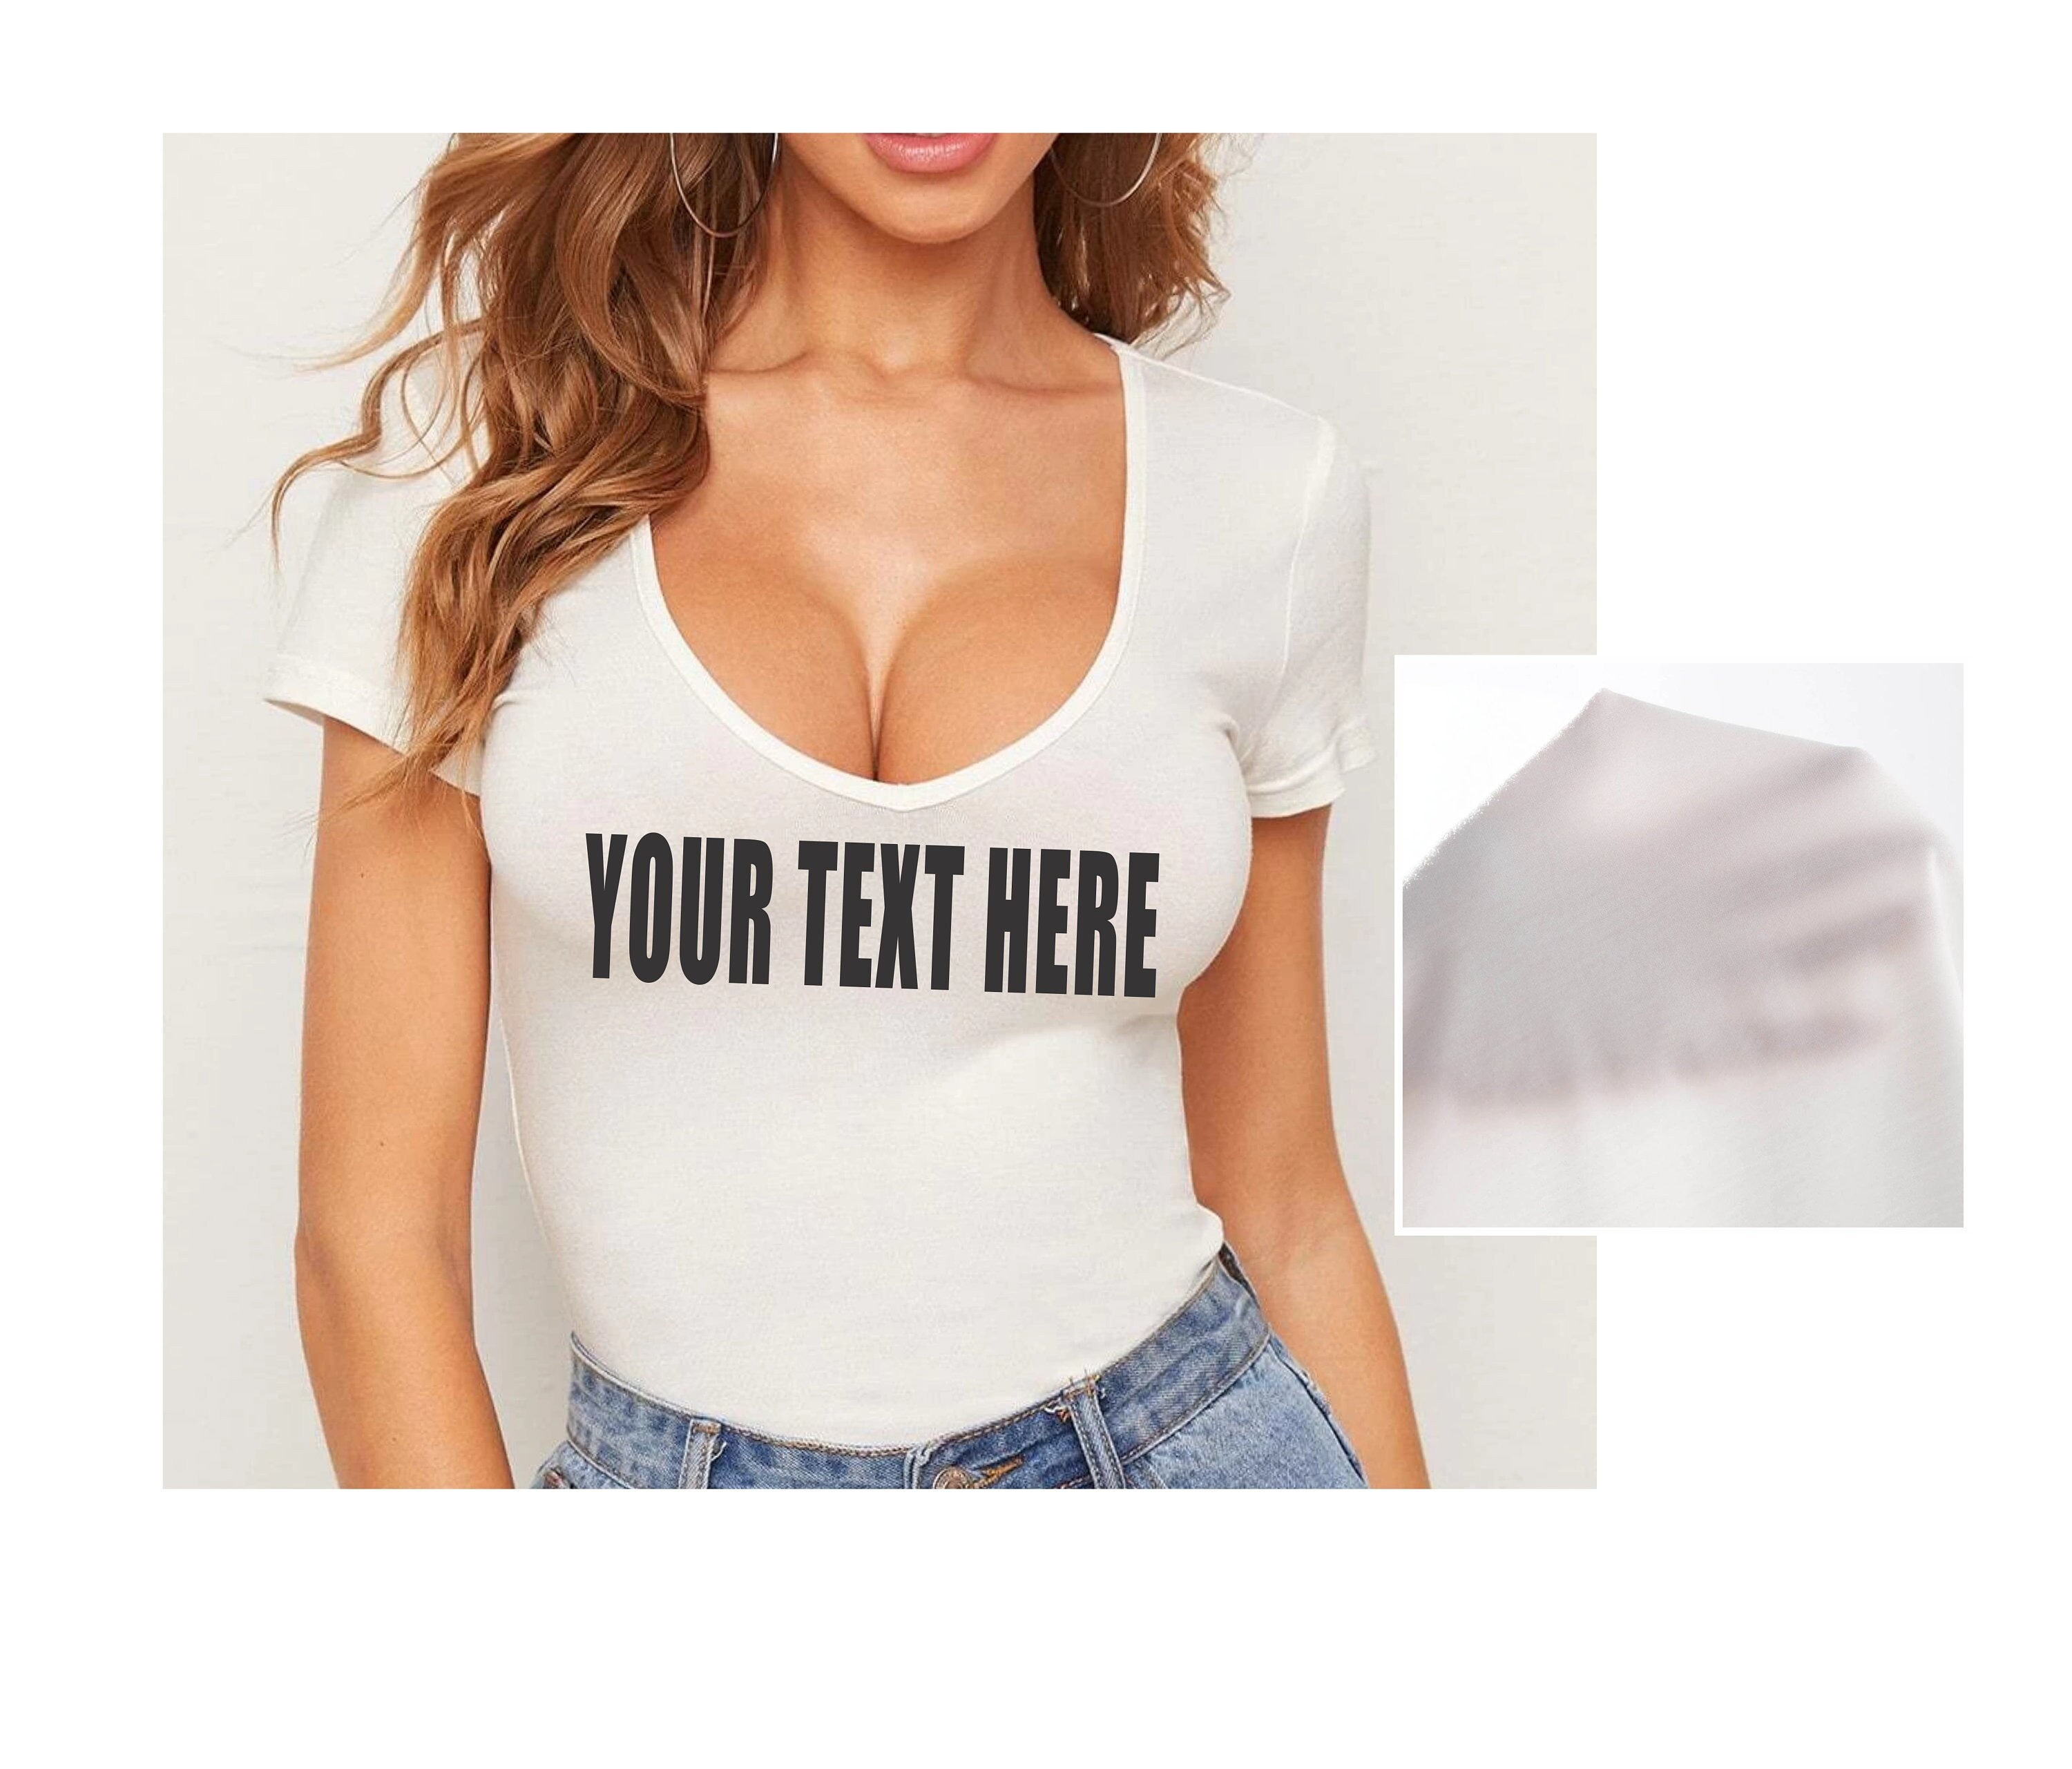 sexy plus size low-cut cleavage v-neck t-shirt tee top 1x2x3x 